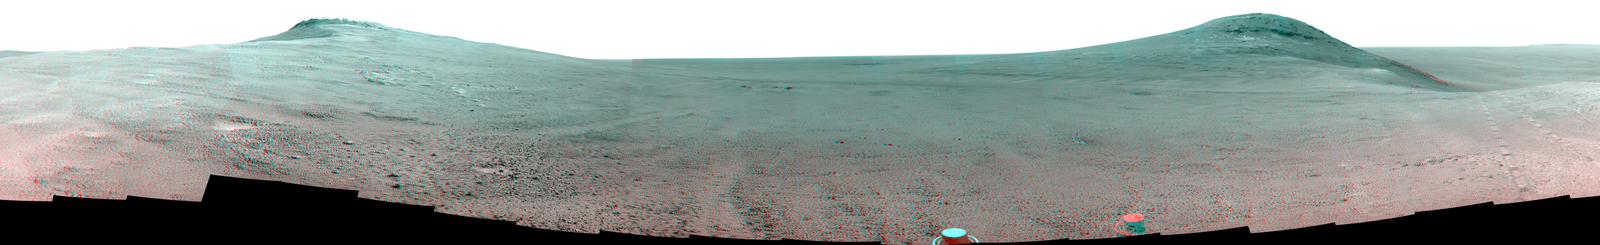 This June 2017 stereo  view from NASA's Opportunity Mars rover shows the area just above  "Perseverance Valley" on the rim of a crater. It combines images from  the left eye and right eye of the rover's Pancam to appear three-dimensional  when seen through blue-red glasses with the red lens on the left.